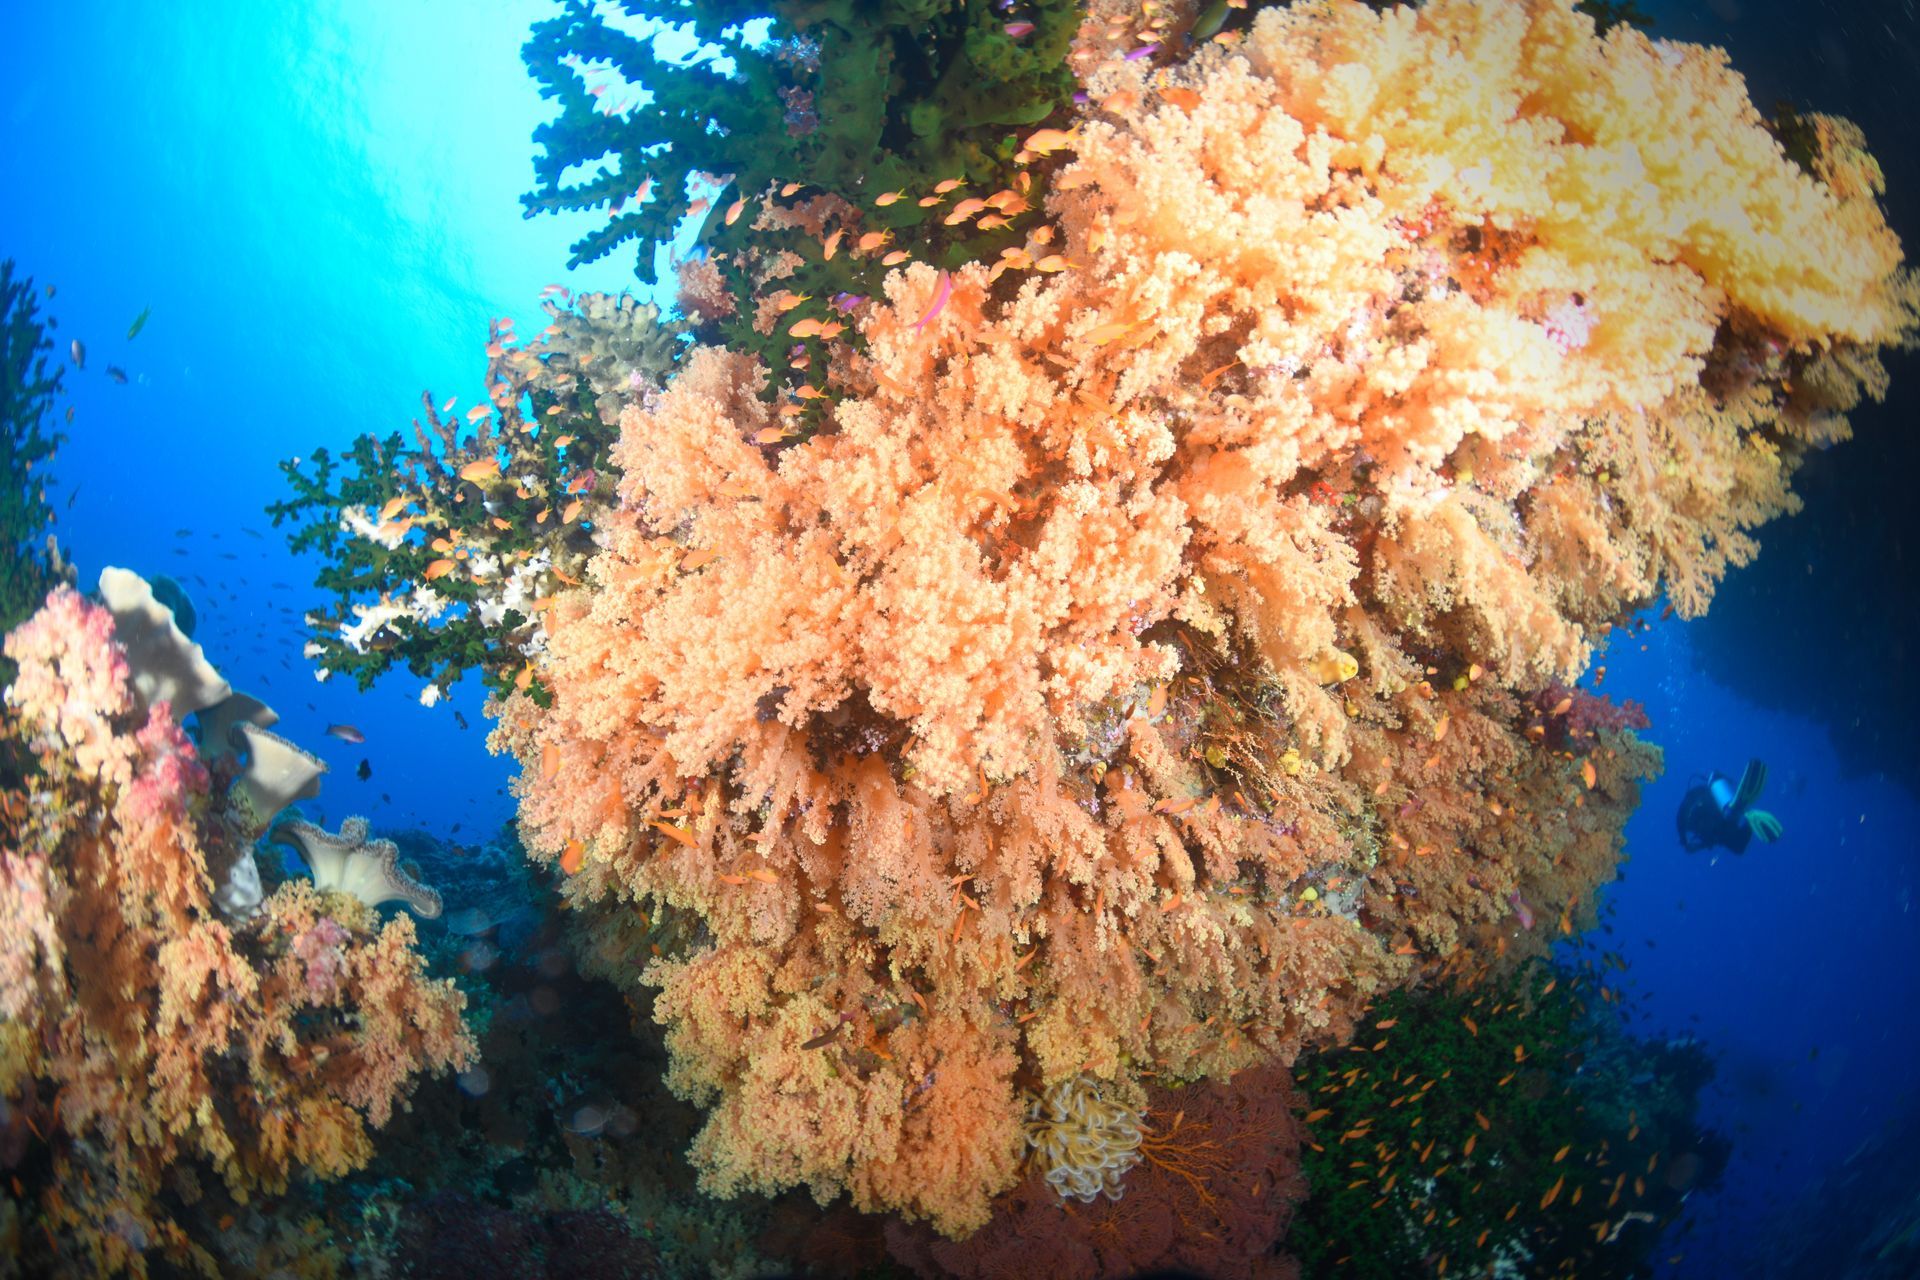 Tangerine soft corals cover a dive site in Fiji with a diver just disappearing into a tunnel through 'Mellow Yellow' site